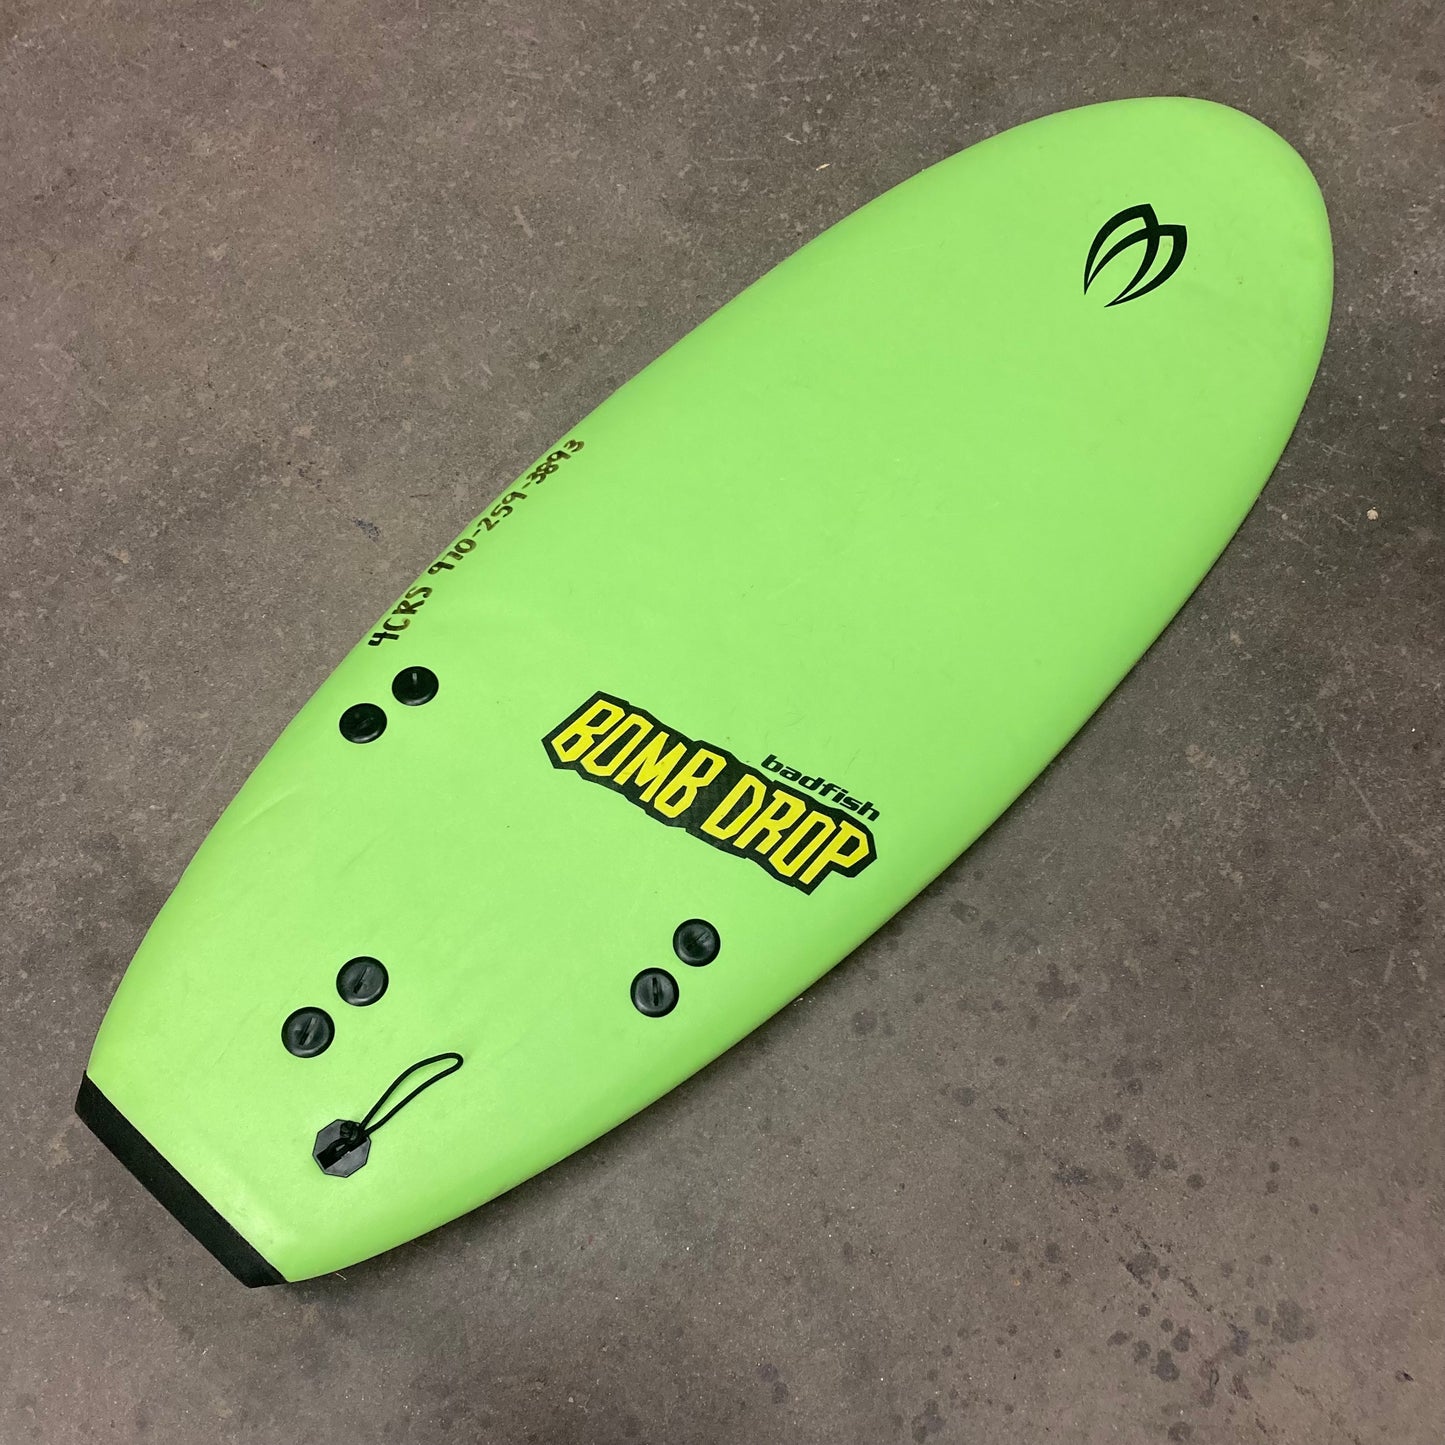 A Badfish Demo Bomb Drop surfboard laying on a concrete floor.